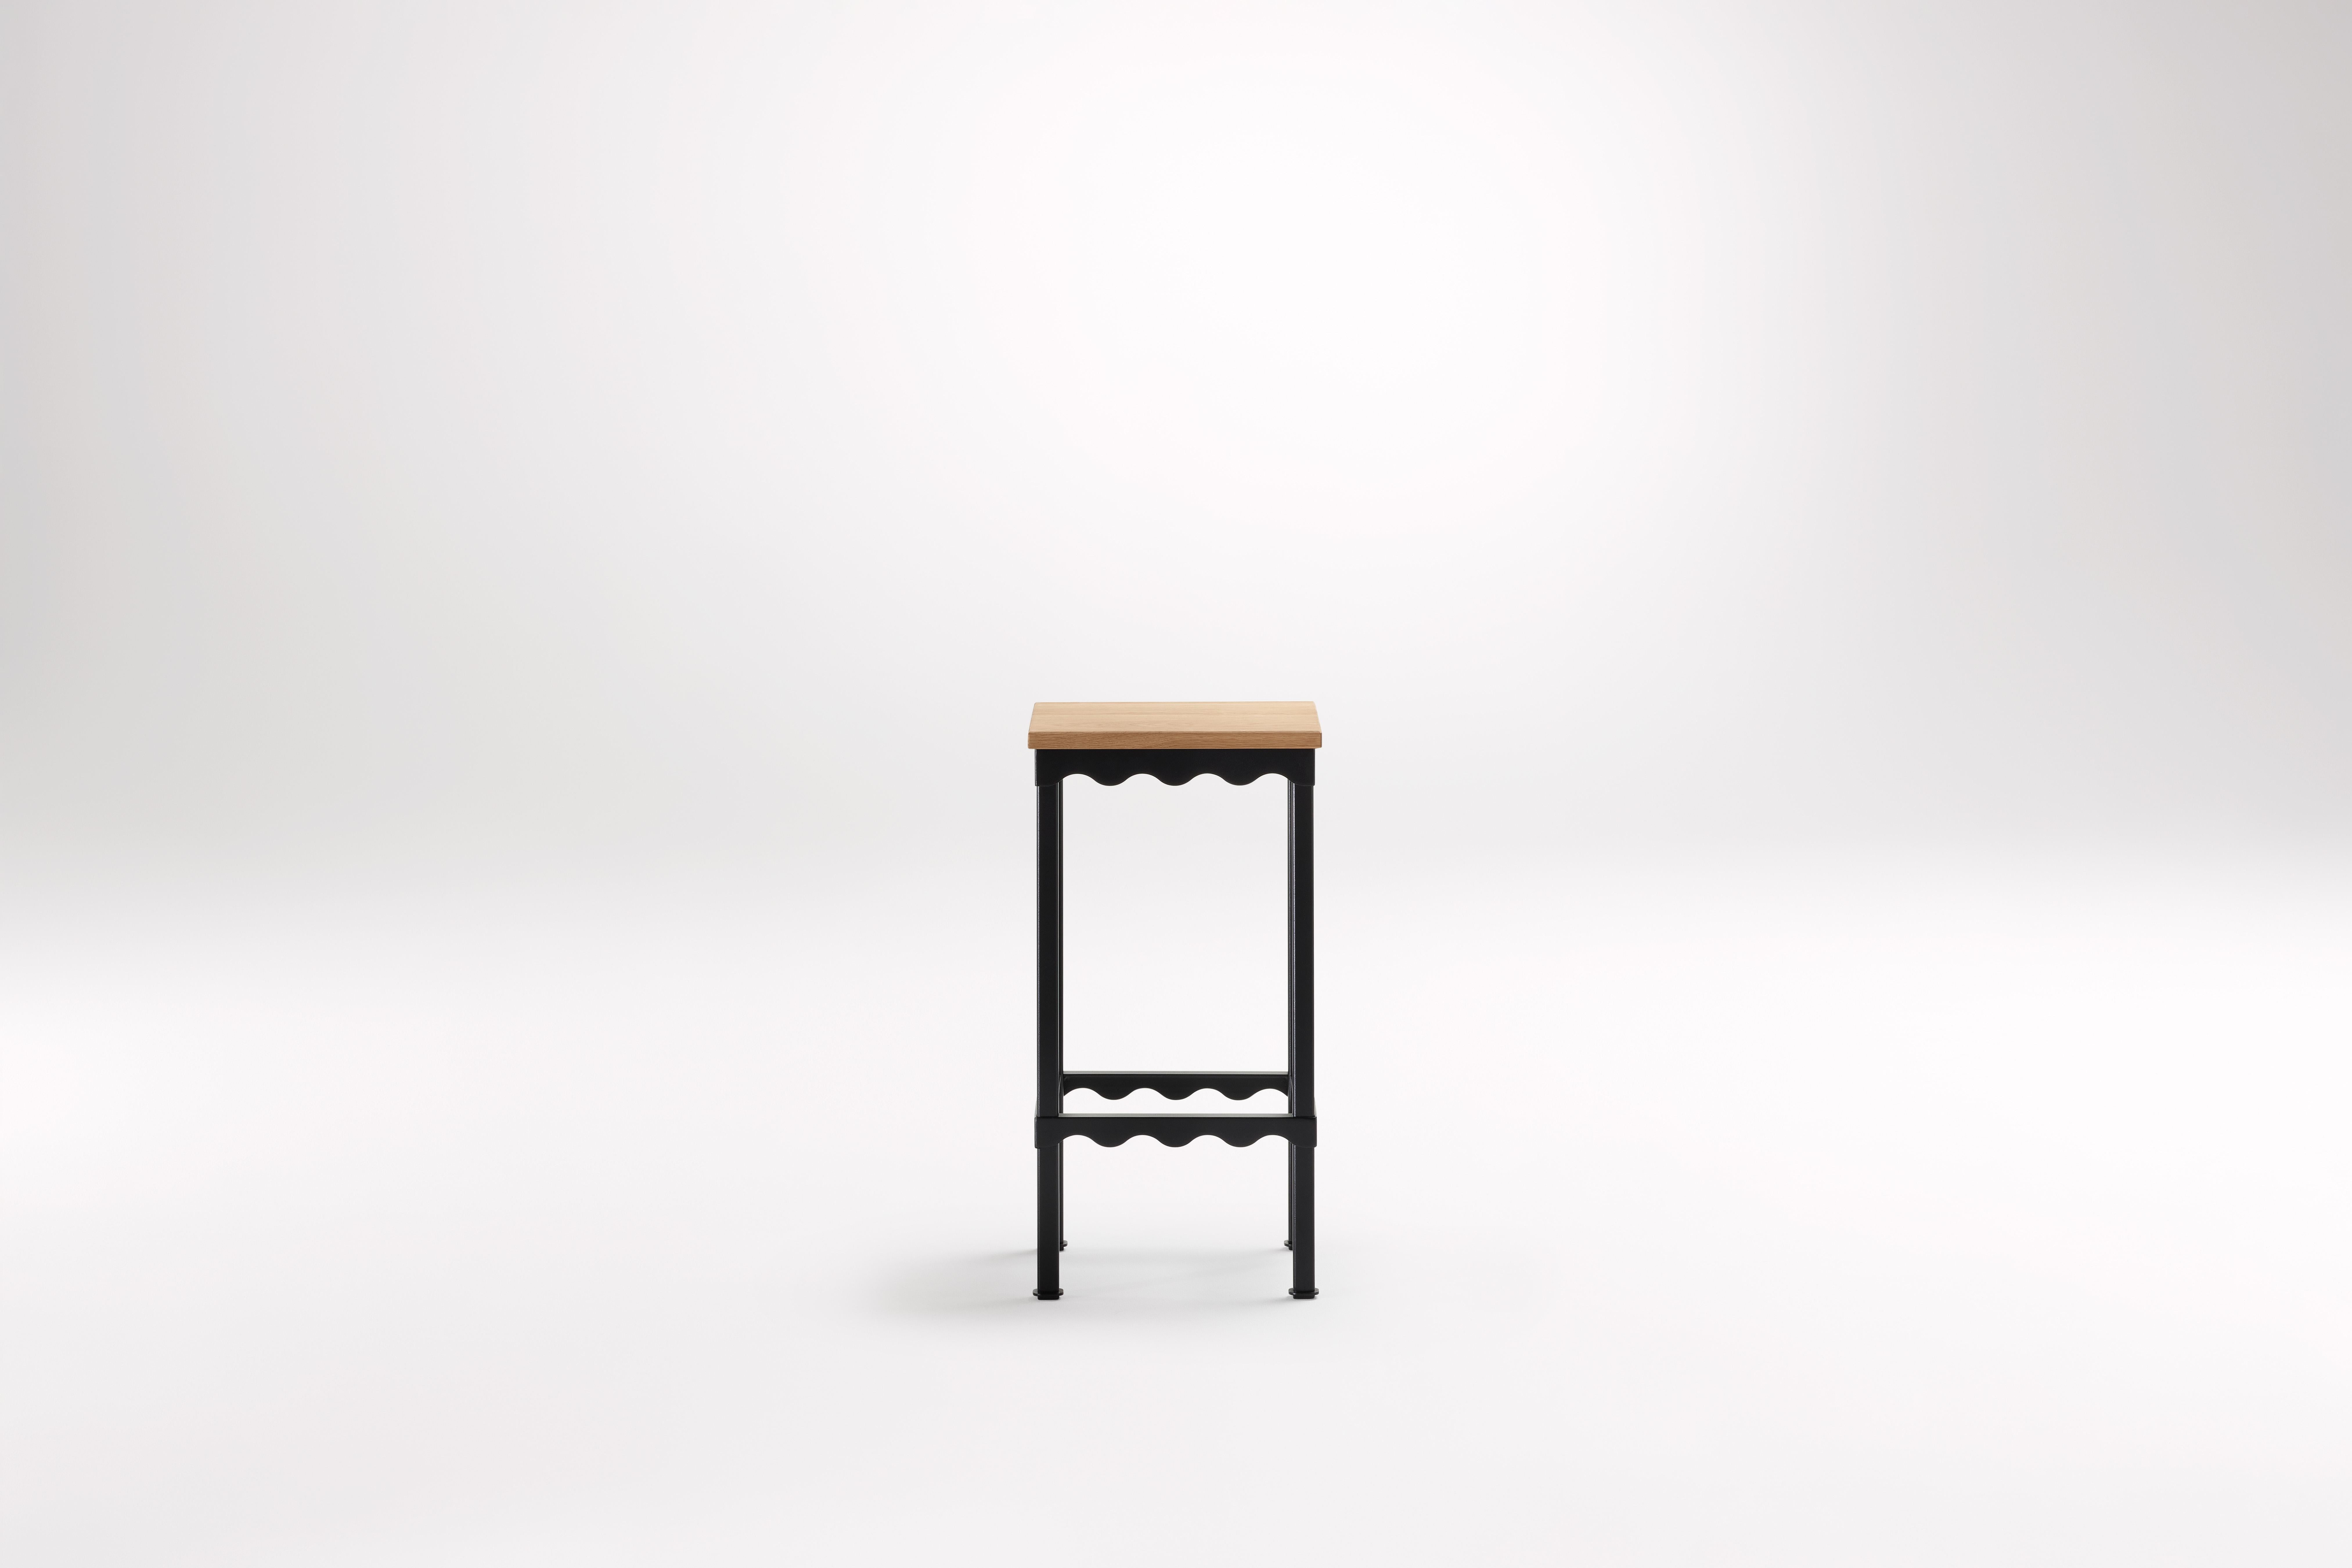 American Oak Bellini High Stool by Coco Flip
Dimensions: D 34 x W 34 x H 65/75 cm
Materials: Timber / Stone tops, Powder-coated steel frame. 
Weight: 8kg
Frame Finishes: Textura Black.

Coco Flip is a Melbourne based furniture and lighting design